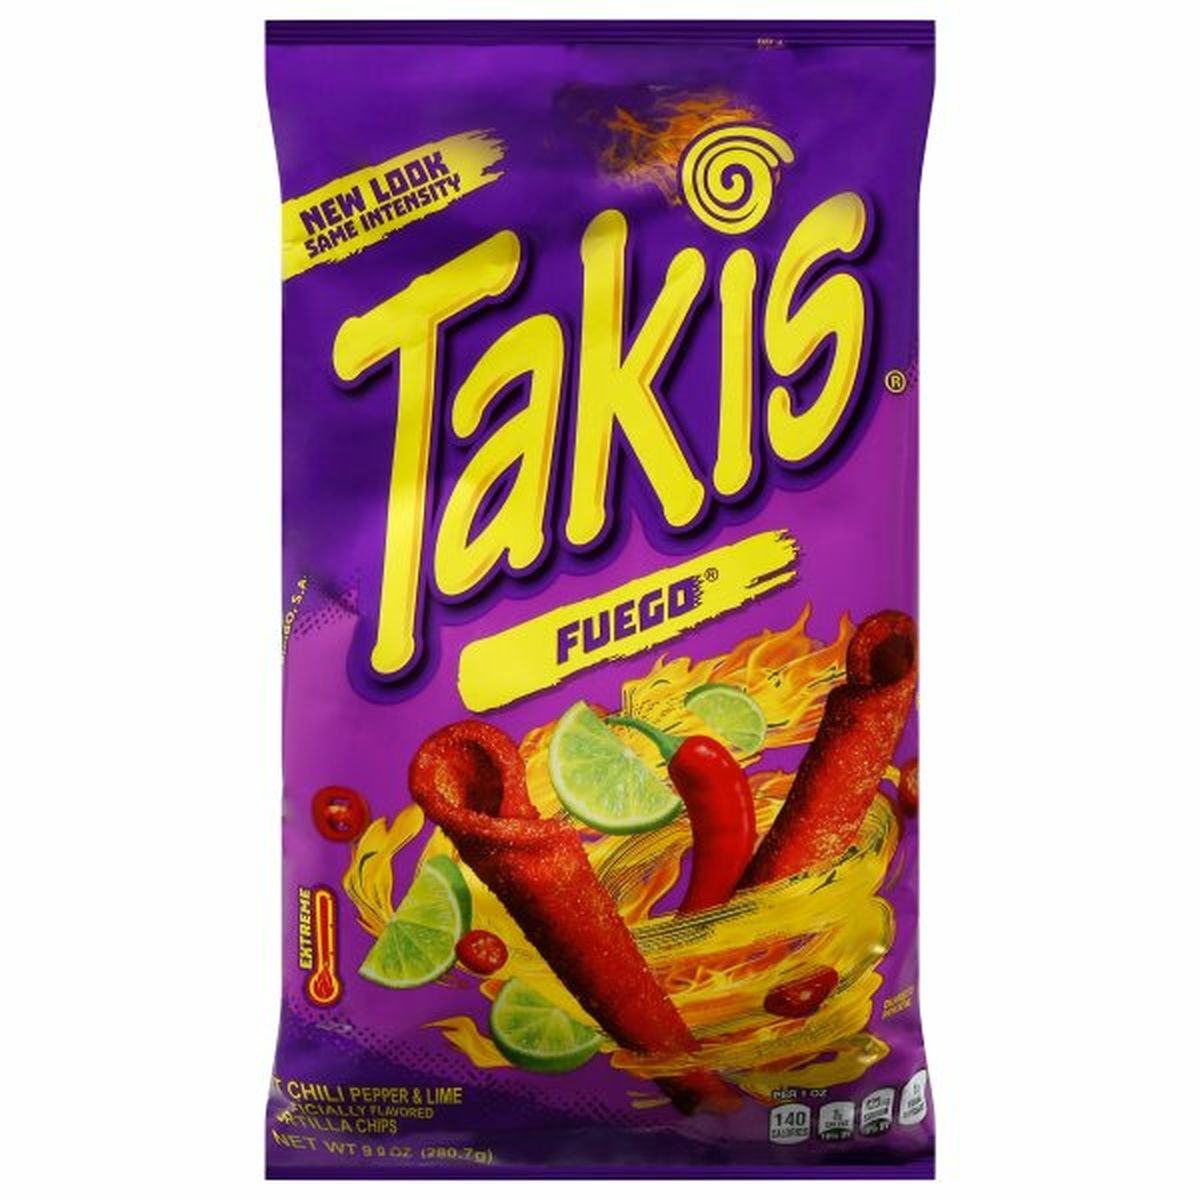 Calories in Takis Fuego Tortilla Chips, Hot Chili Pepper & Lime